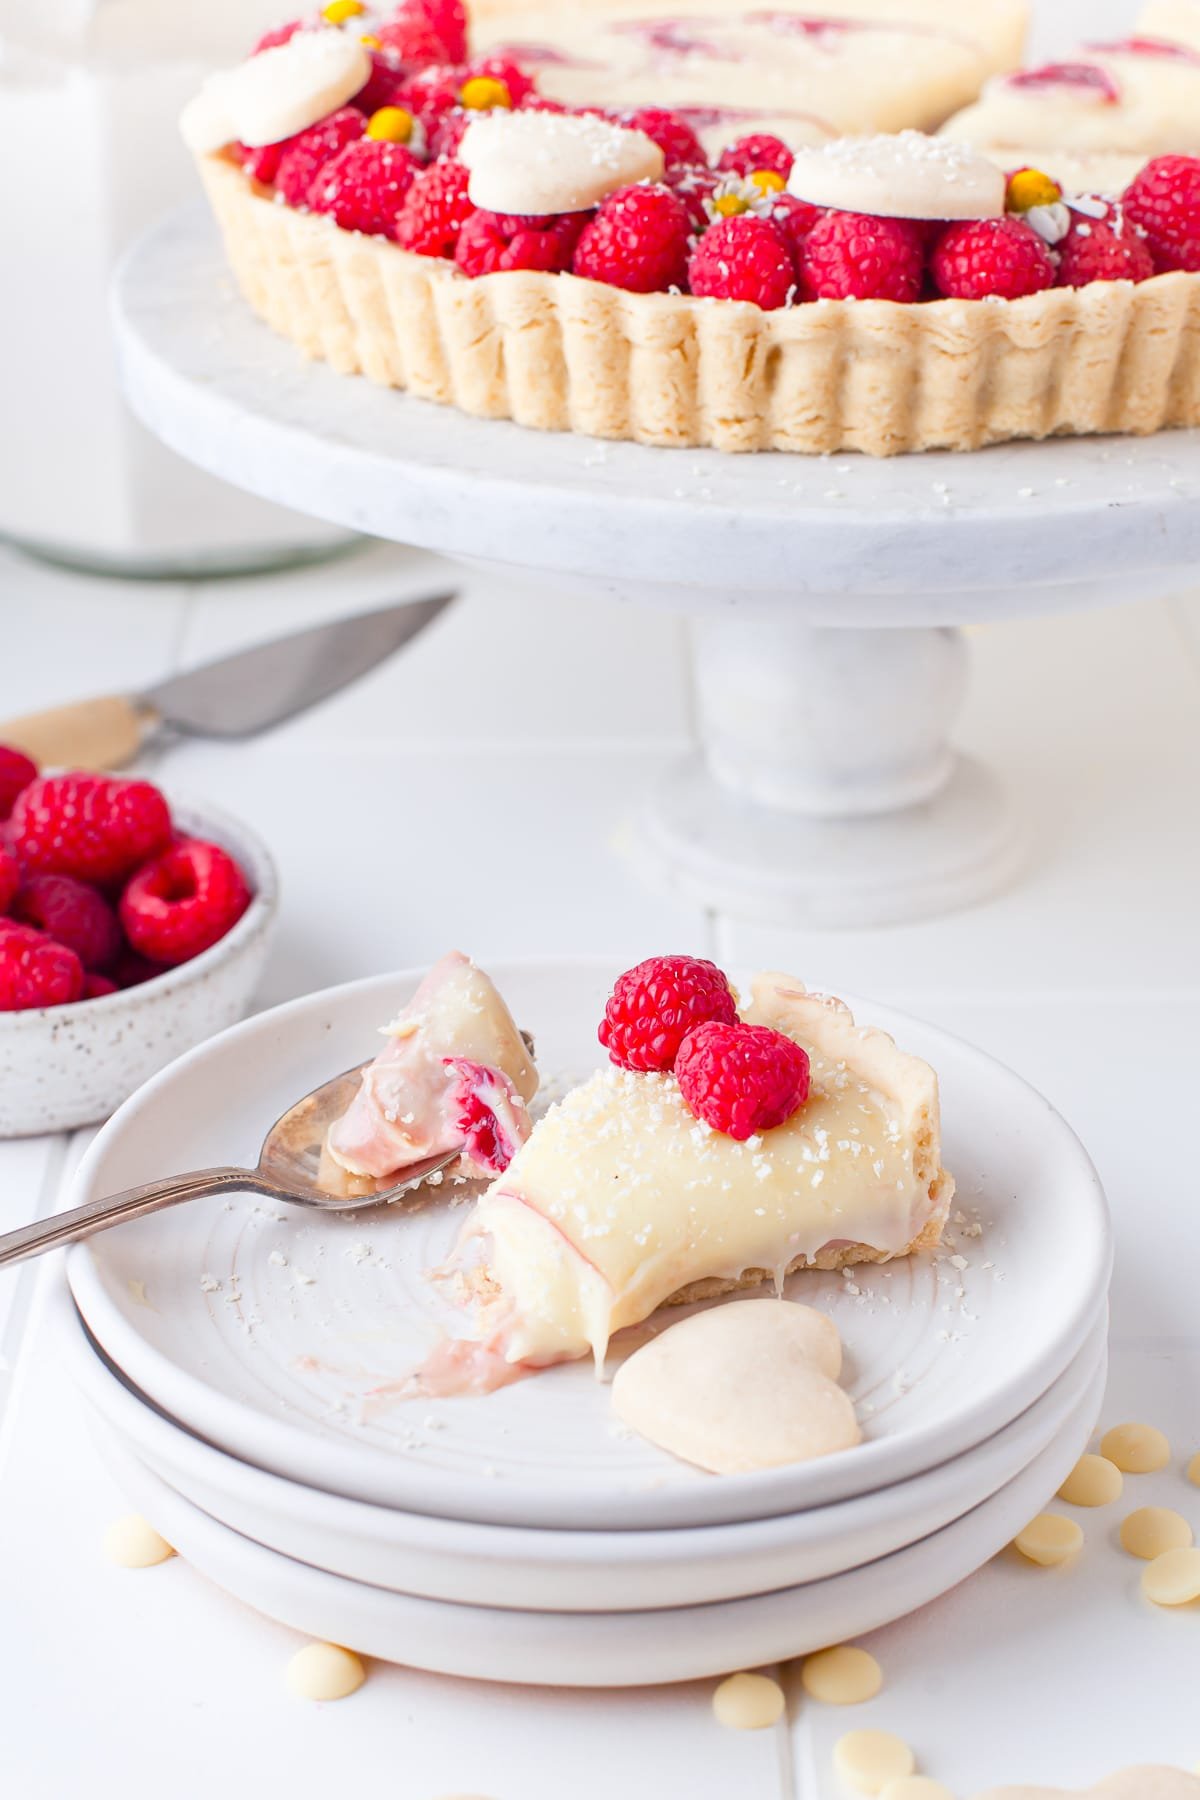 A slice of Raspberry Tart on a stack of white plates with with a piece taken out with a fork. White cake stand with the tart on it in the back ground, white while countertop, bowl of raspberries and cake knife in background.